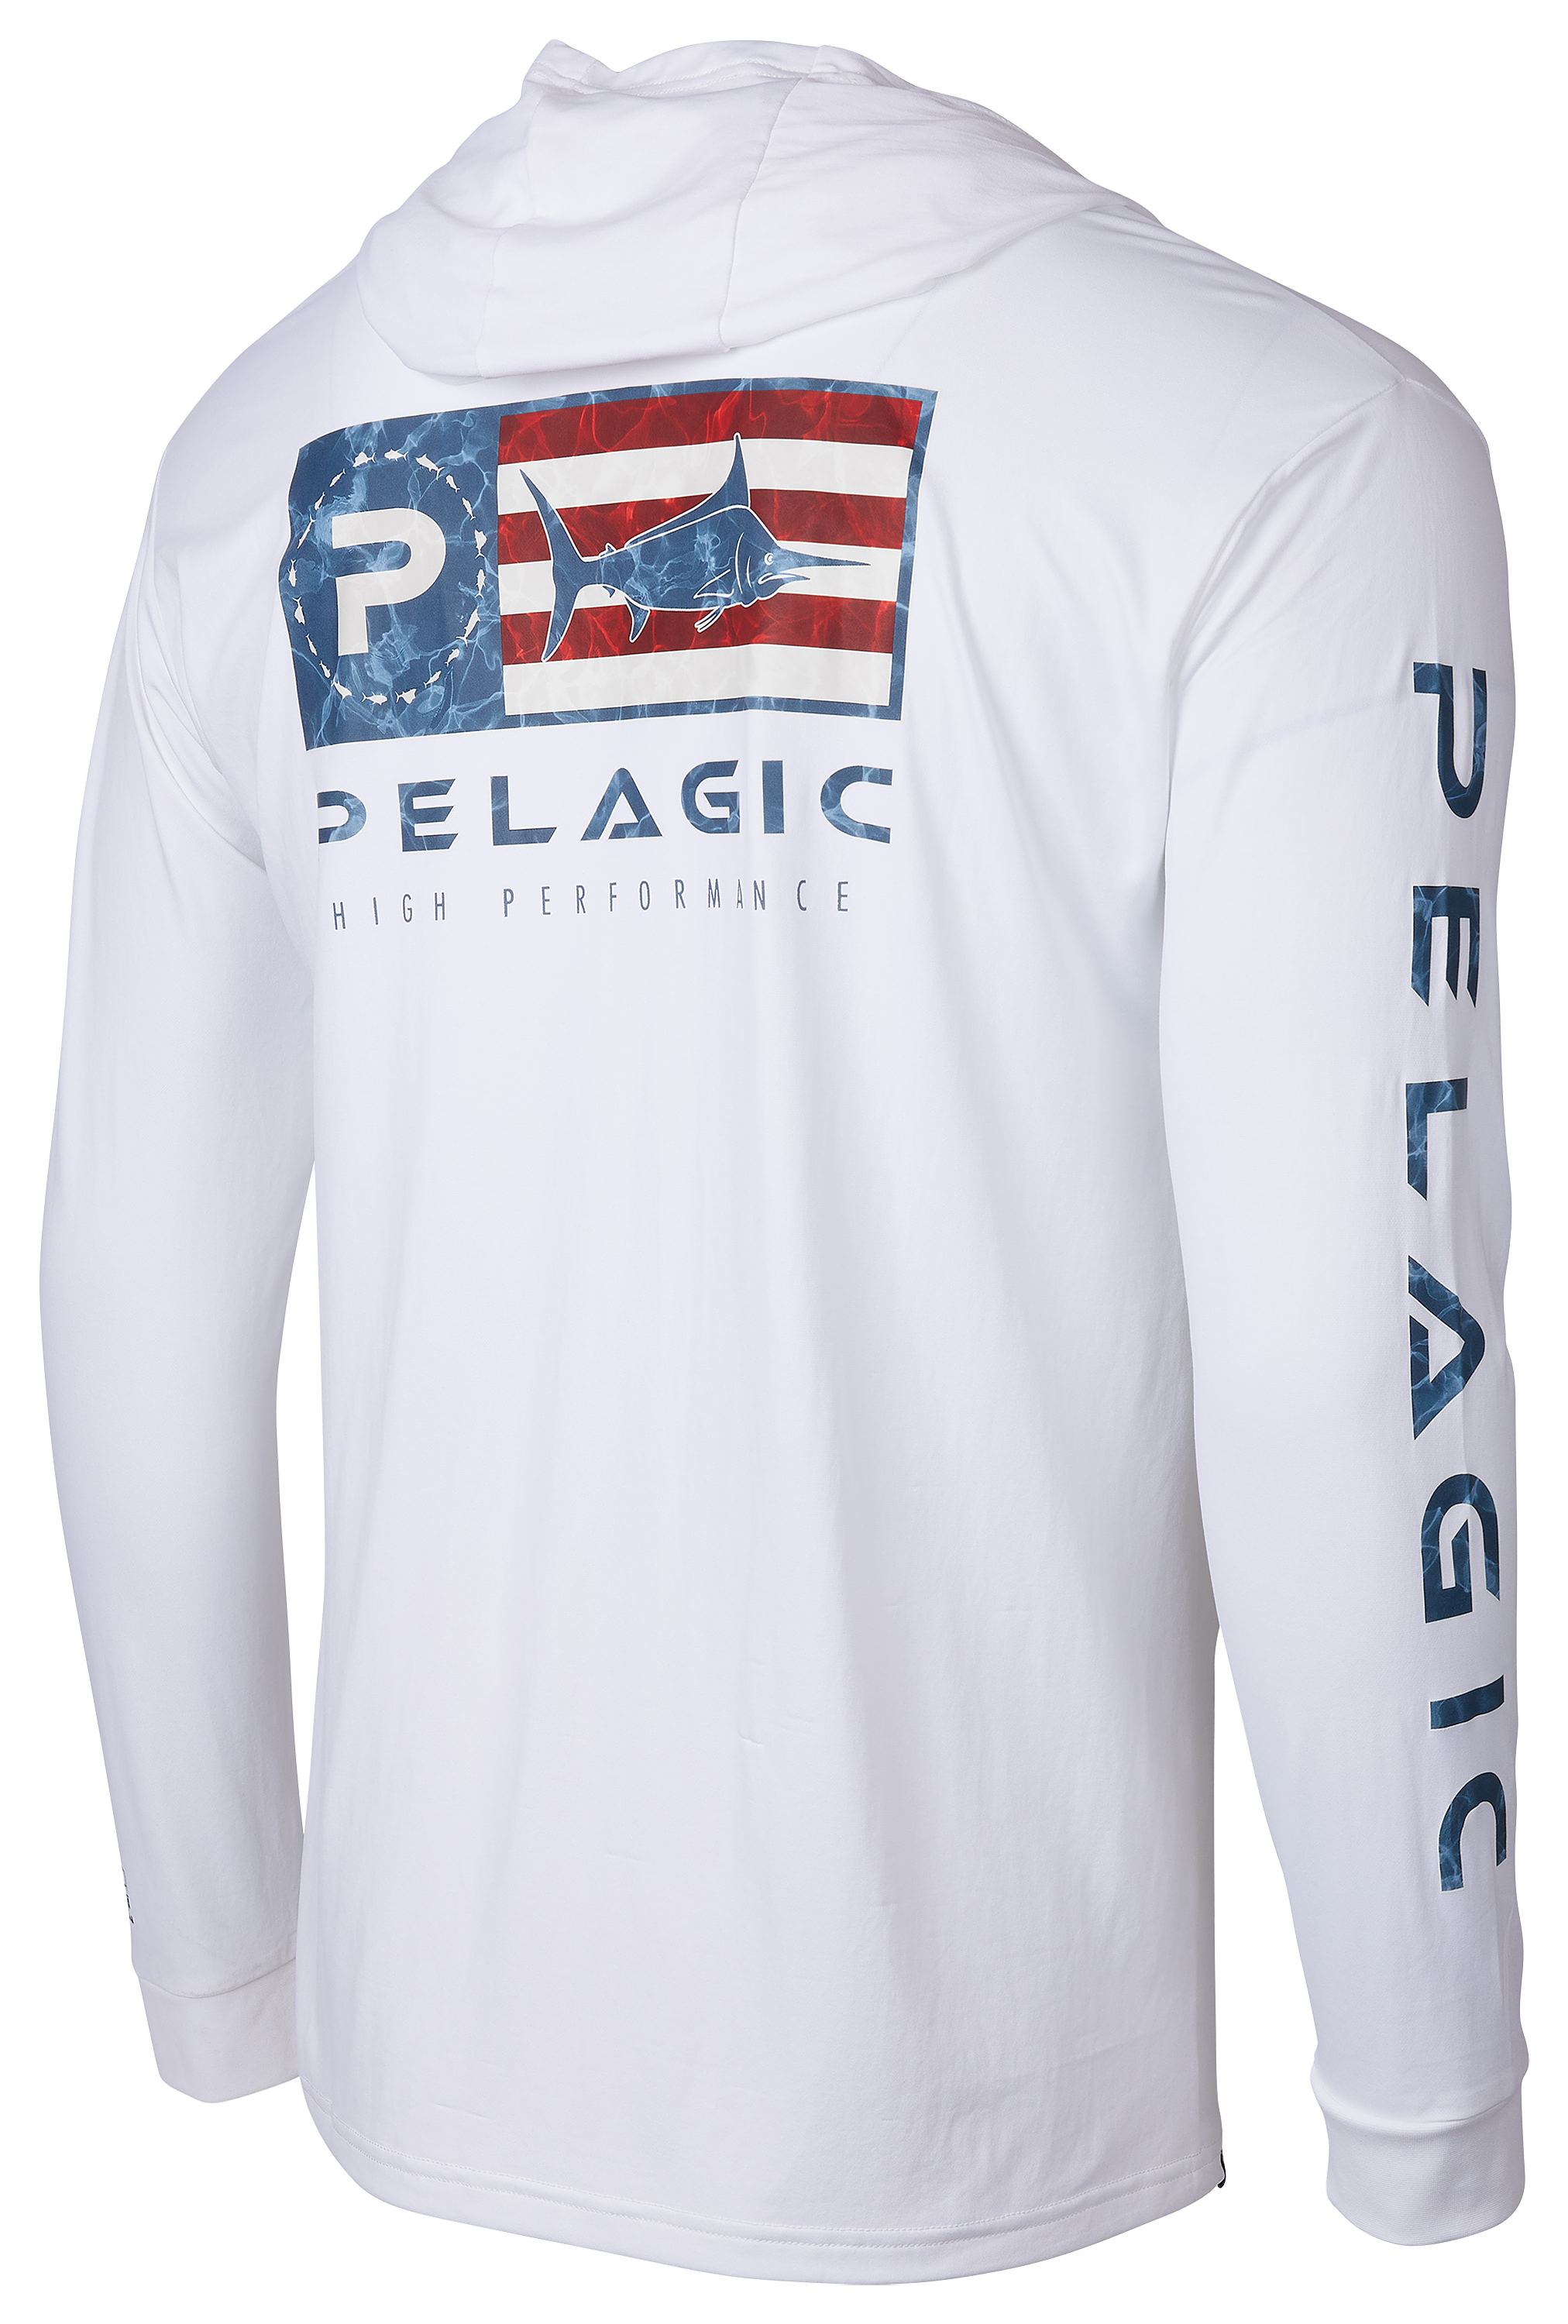 PELAGIC Apparel Men's Vaportek Fishing Shirt, Long Sleeve, UPF 50+  Protection, Water and Stain Repellent, Ventilated and Lightweight